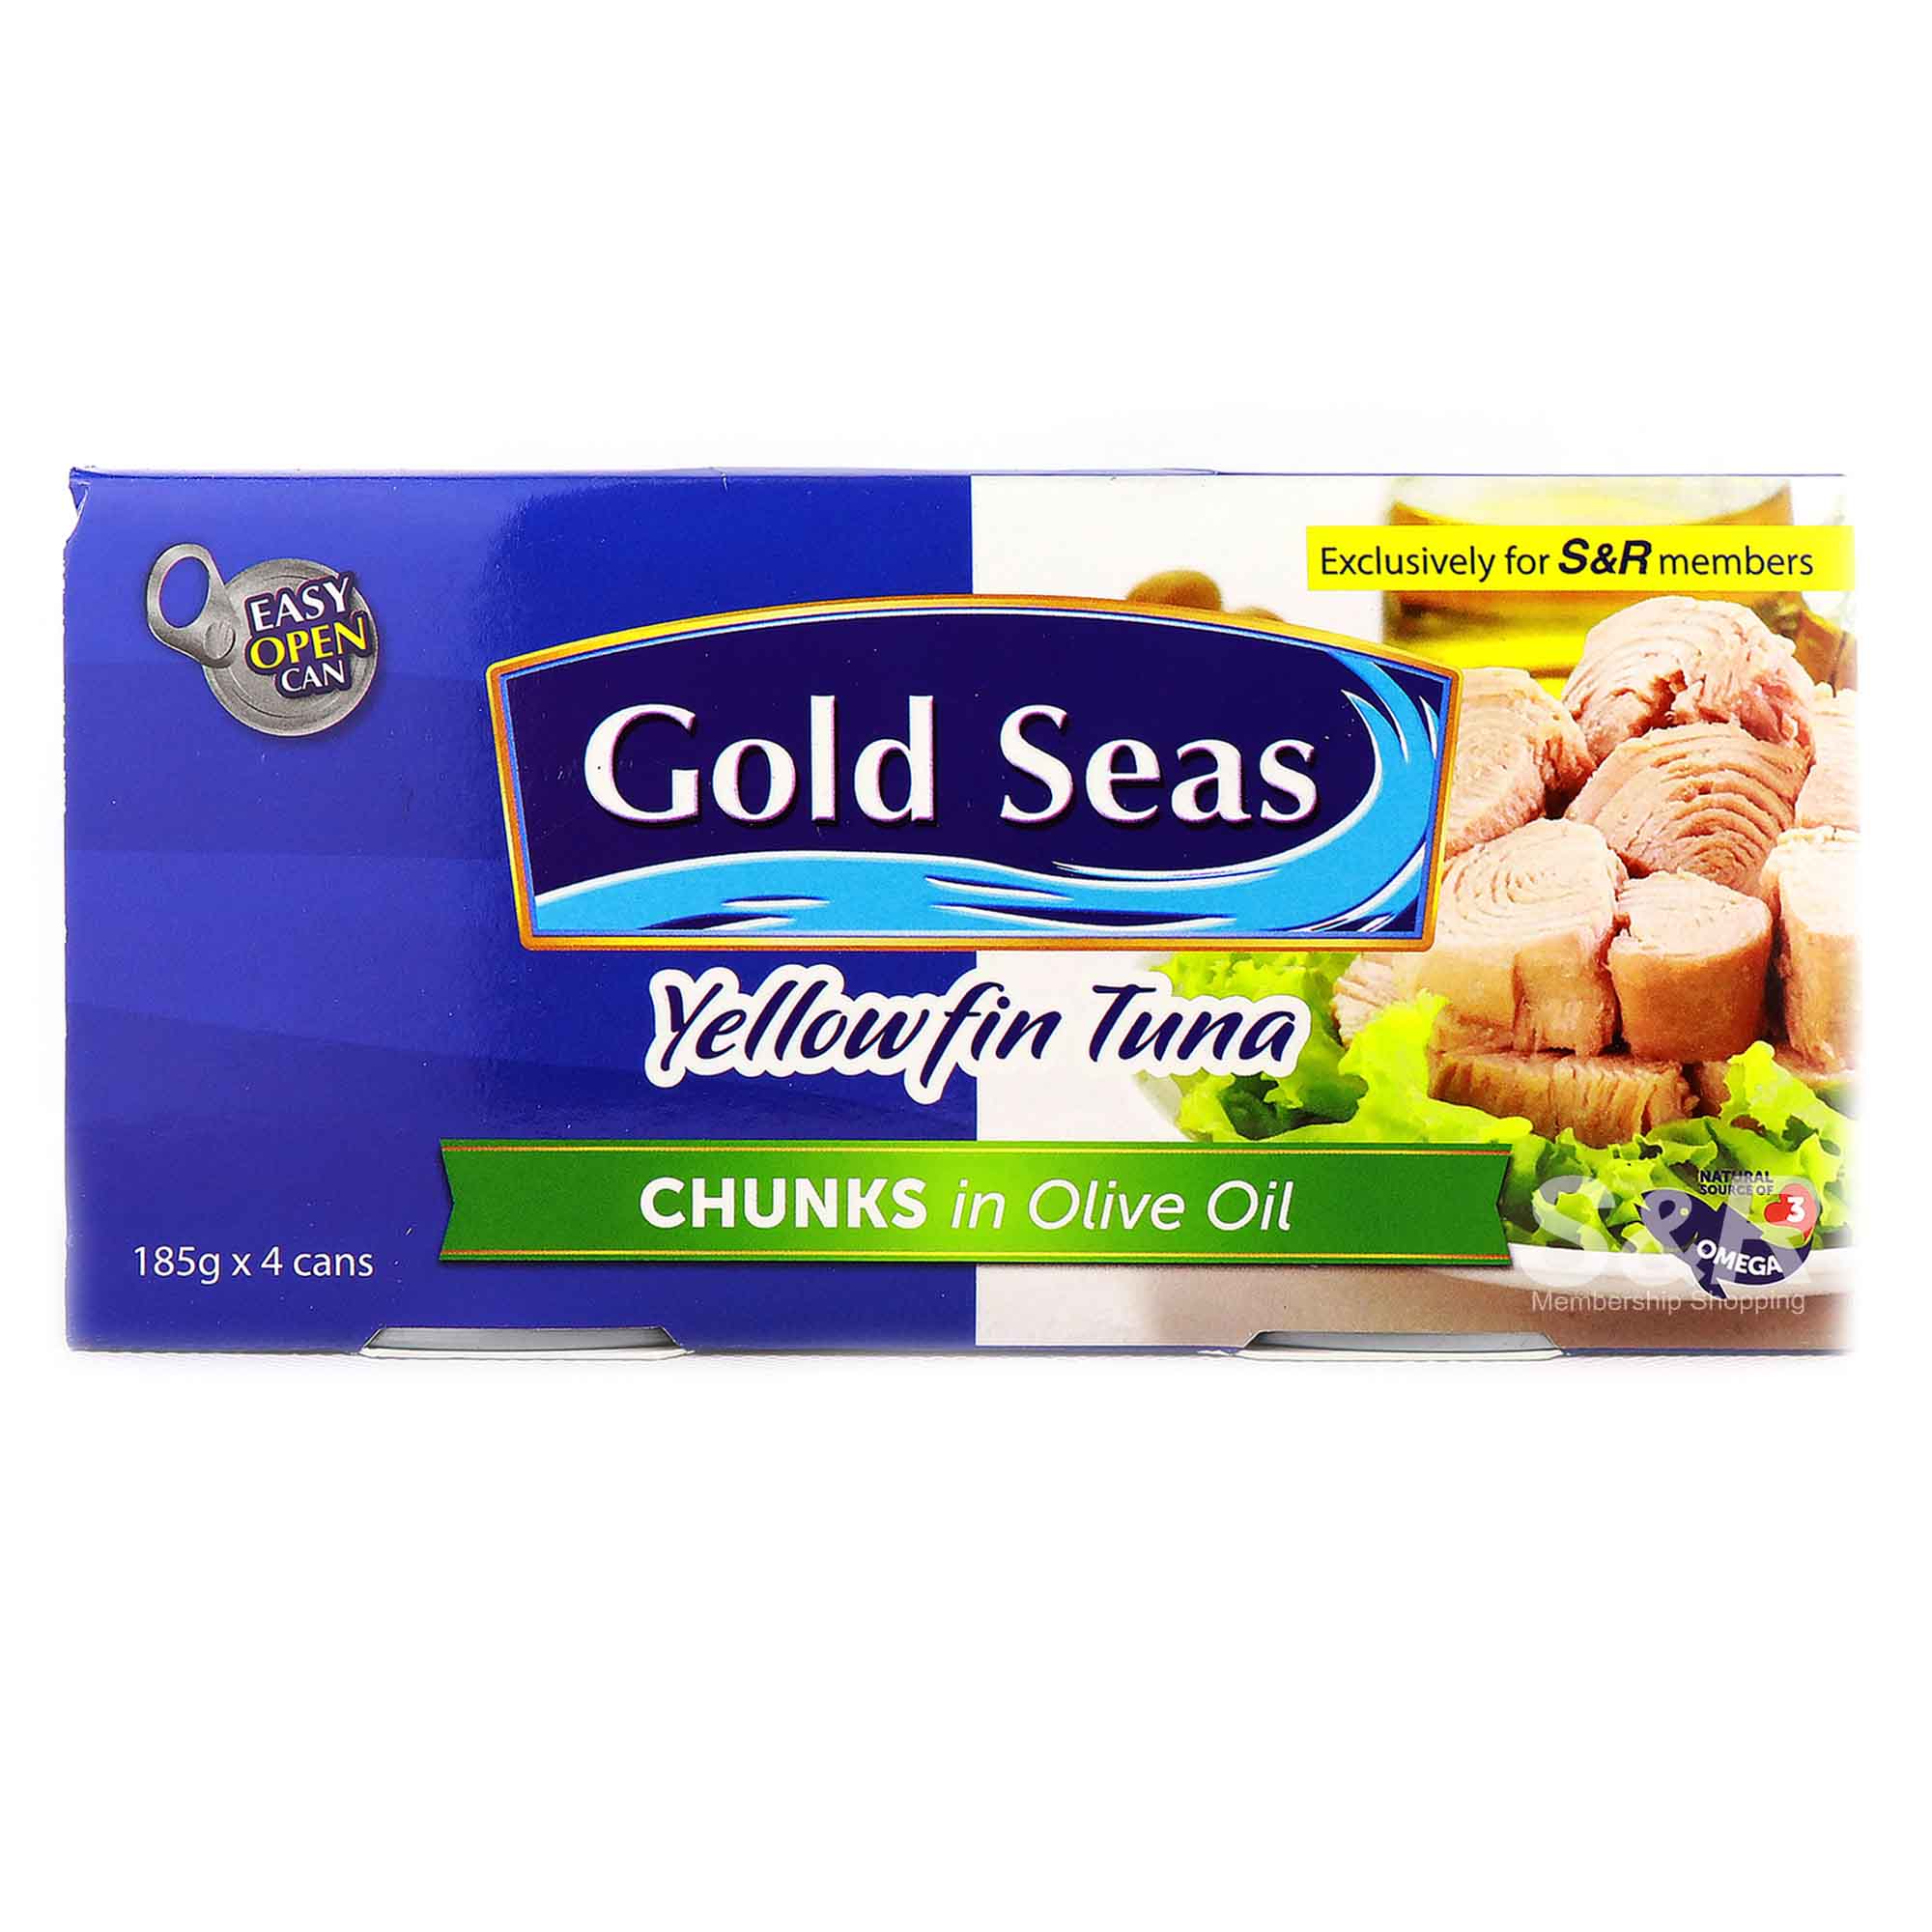 Gold Seas Yellowfin Tuna Chunks in Olive Oil 4 cans